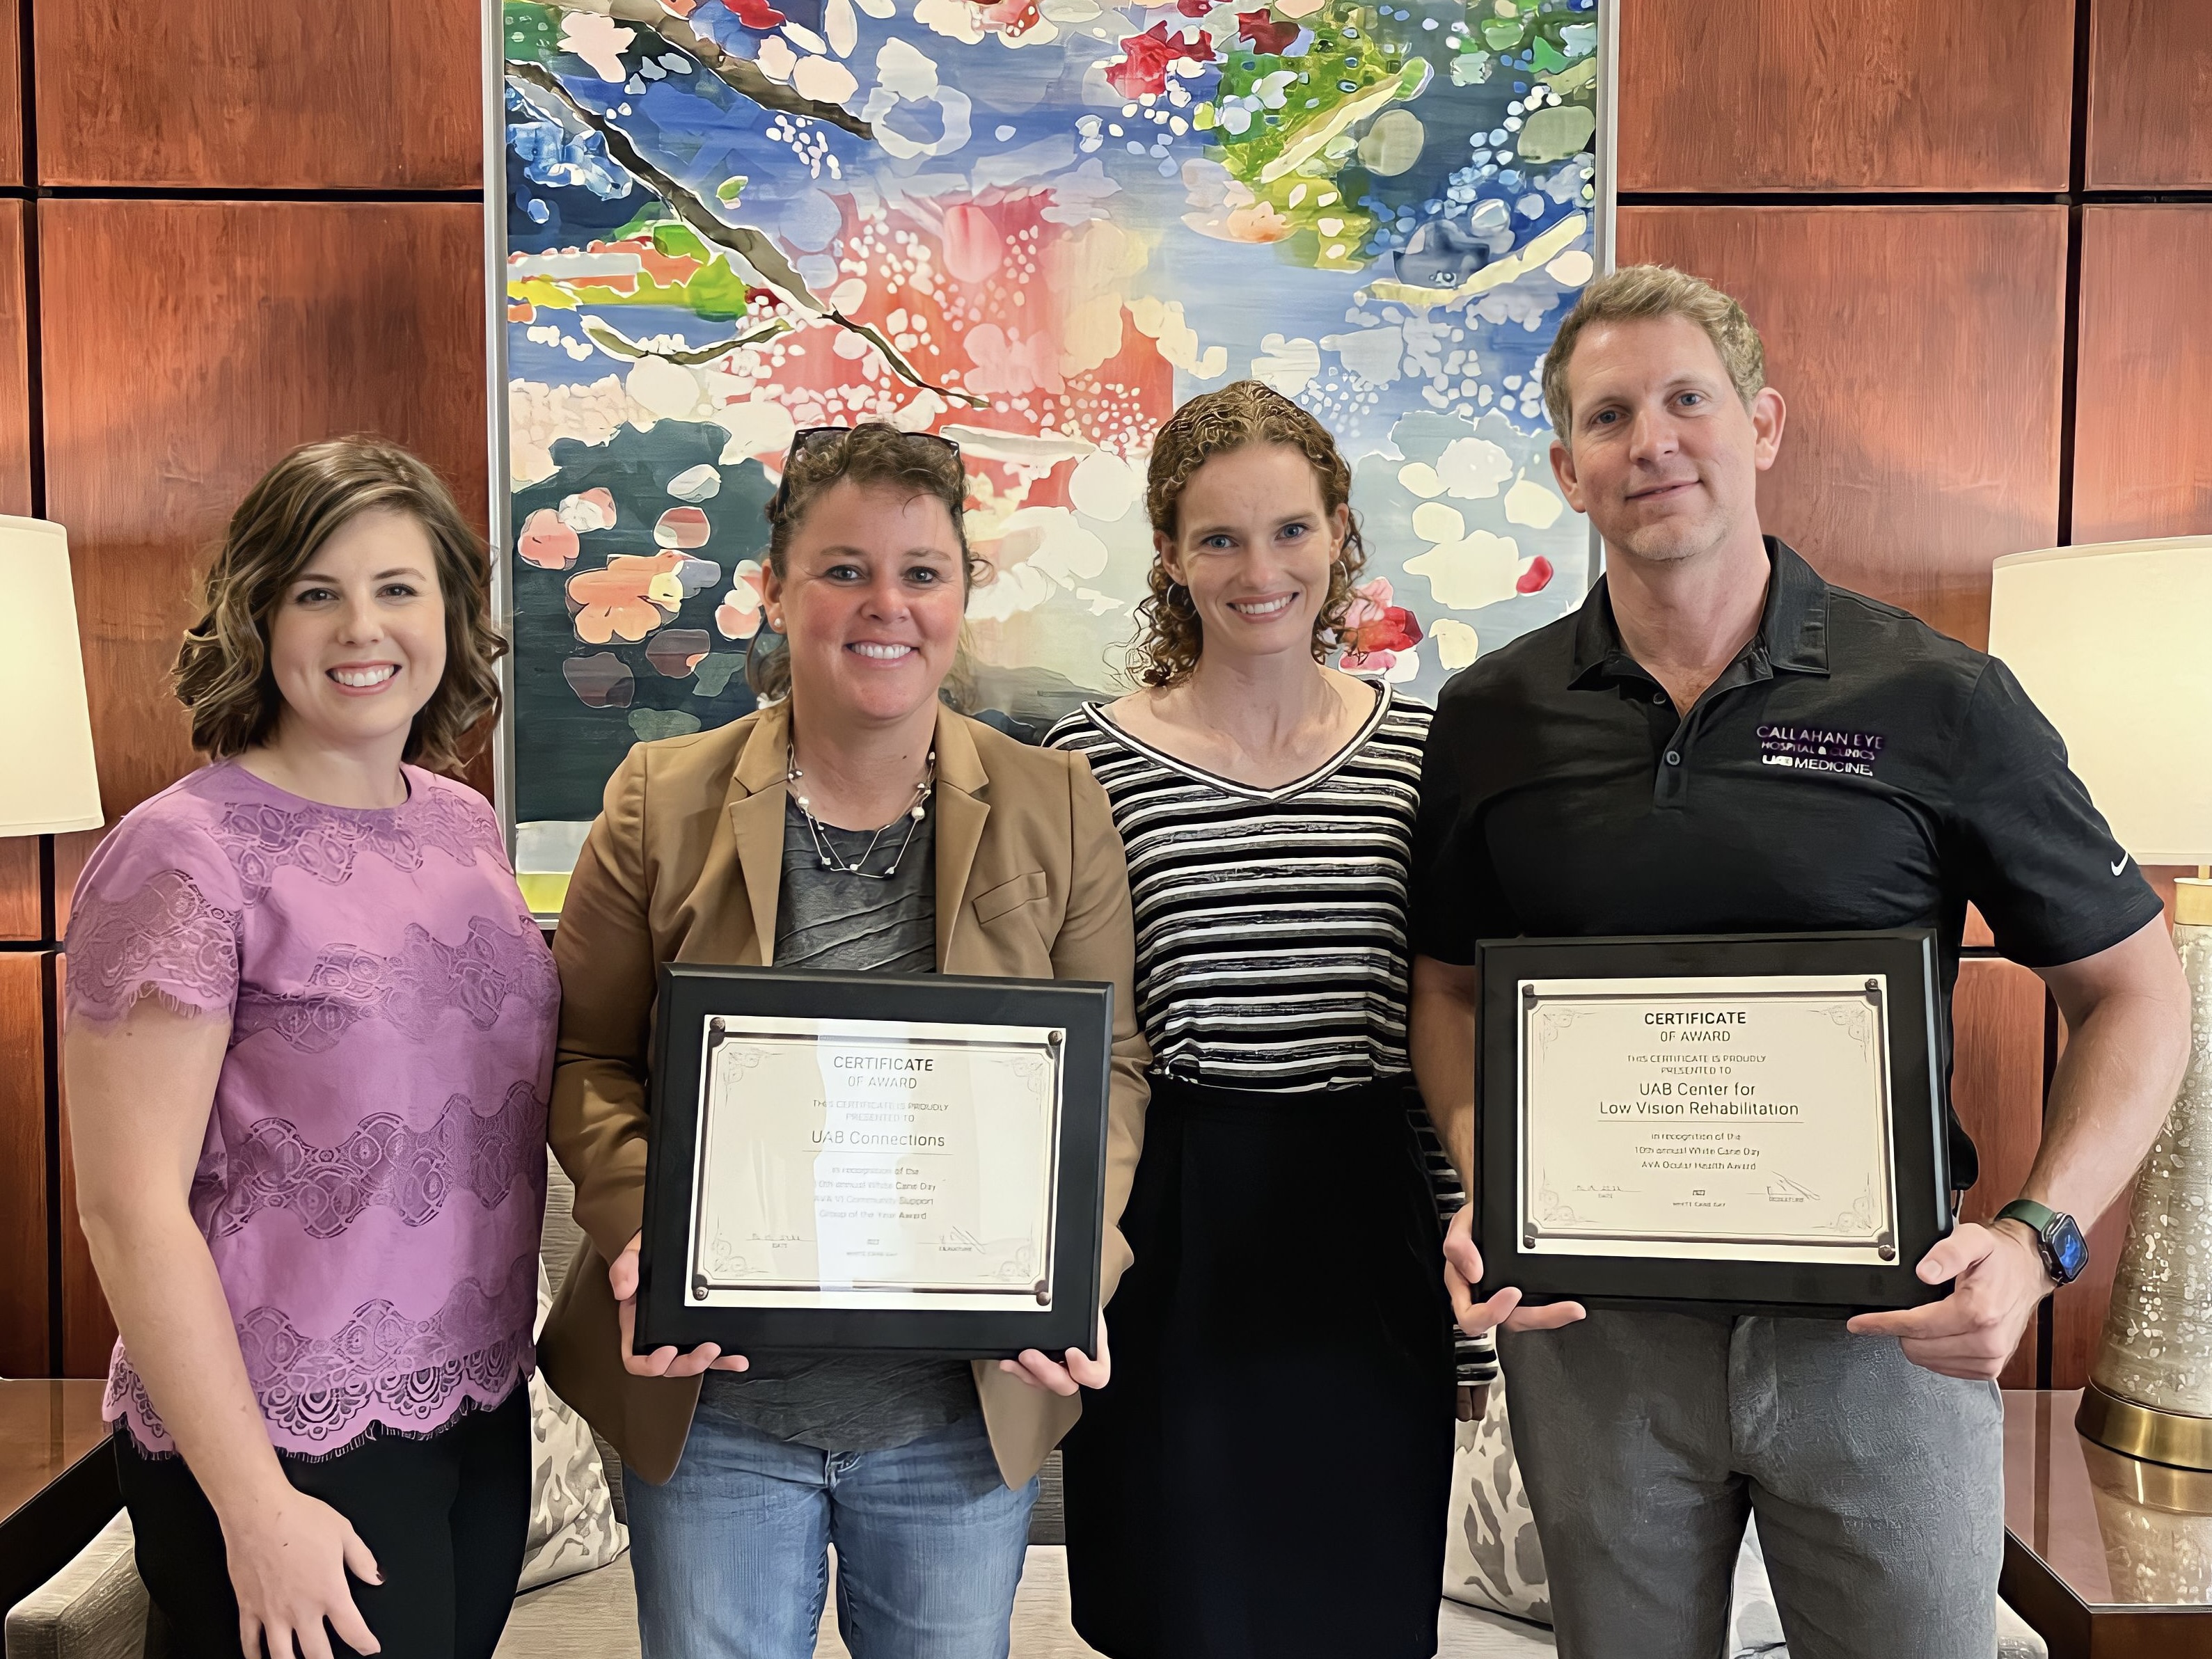 Molly Cox-Whitney, MS, LPC, Director Laura Dreer, PhD, and Brooke Bailey with UAB Connections. Jason Vice, OTR/L, SCLV, with the UAB Center for Low Vision Rehabilitation